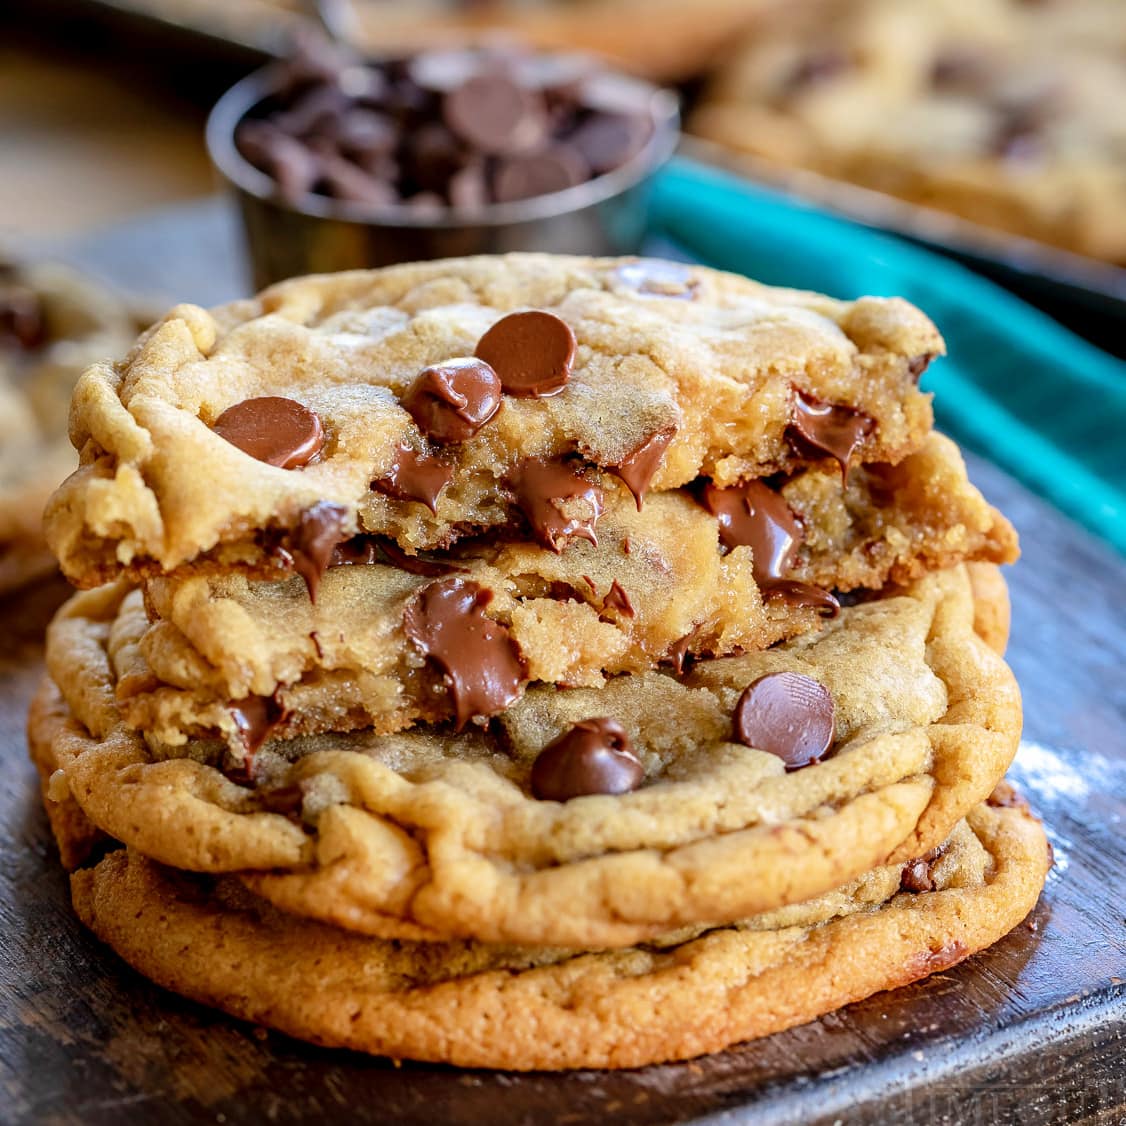 https://www.momontimeout.com/wp-content/uploads/2020/09/stack-of-chewy-chocolate-chip-cookies-on-dark-wood-board-square.jpg